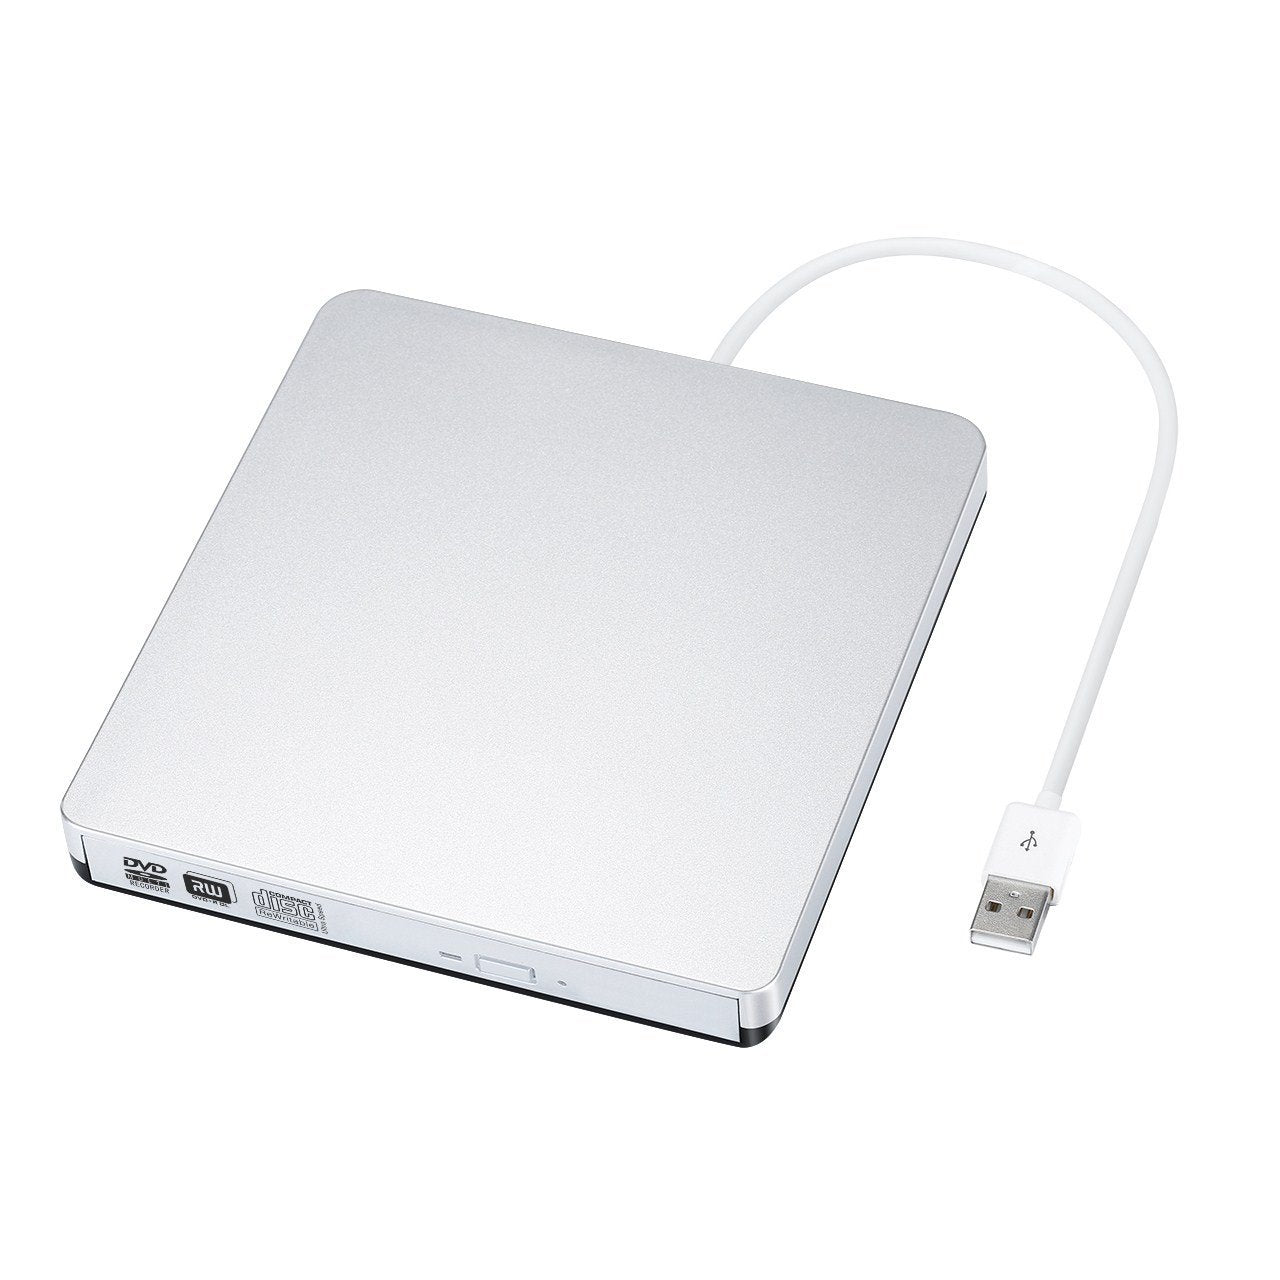 TOPELEK PPC013S USB 2.0 Portable External Slot CD/DVD-RW Burner Writer With Built-in USB Cable, Silver for Macbook, Macbook Pro, Macbook Air or Other Laptop/Desktops